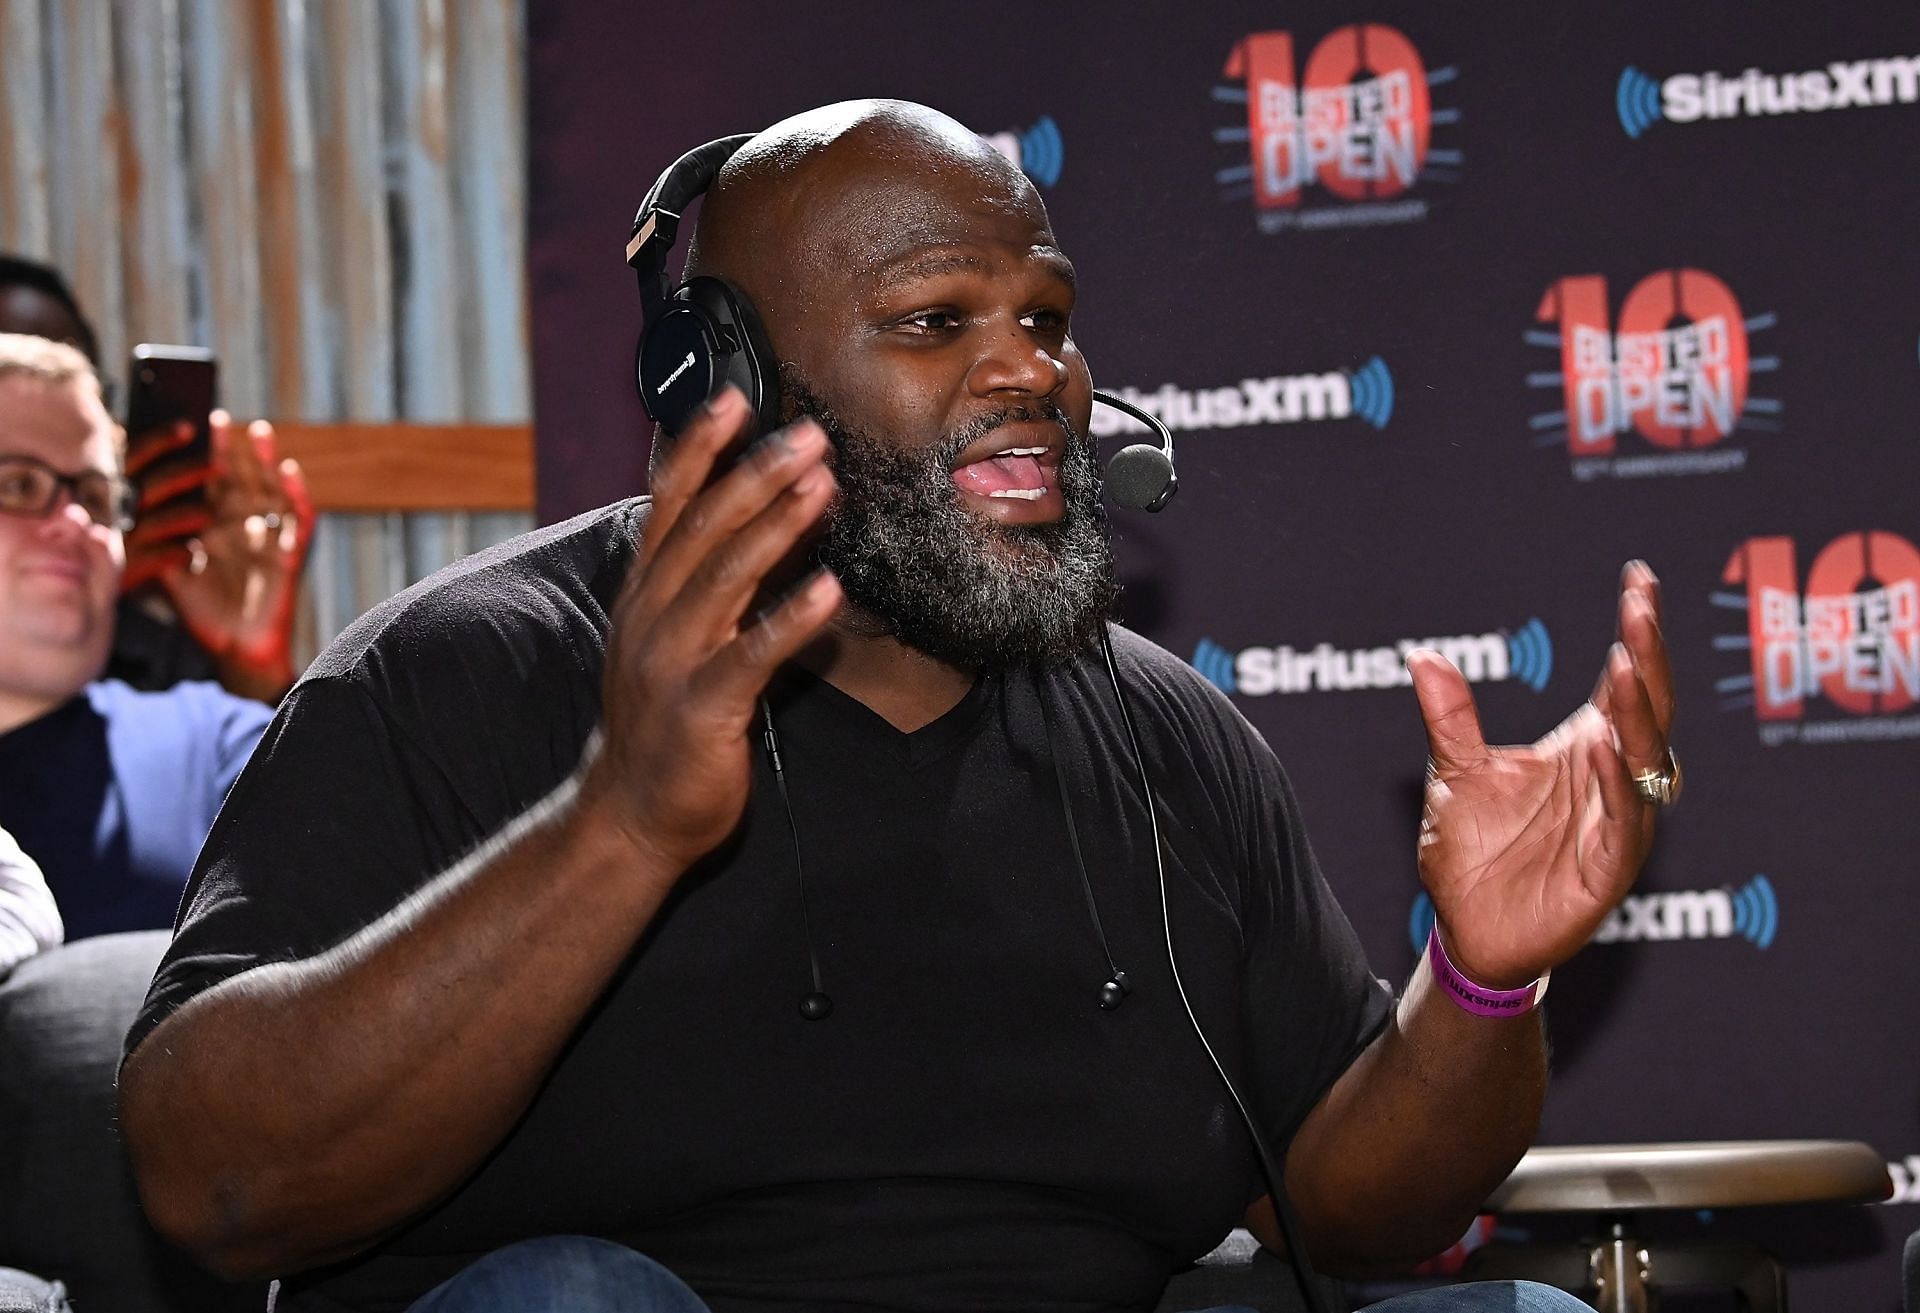 Mark Henry is currently a commentator/analyst, coach, and talent scout in AEW.